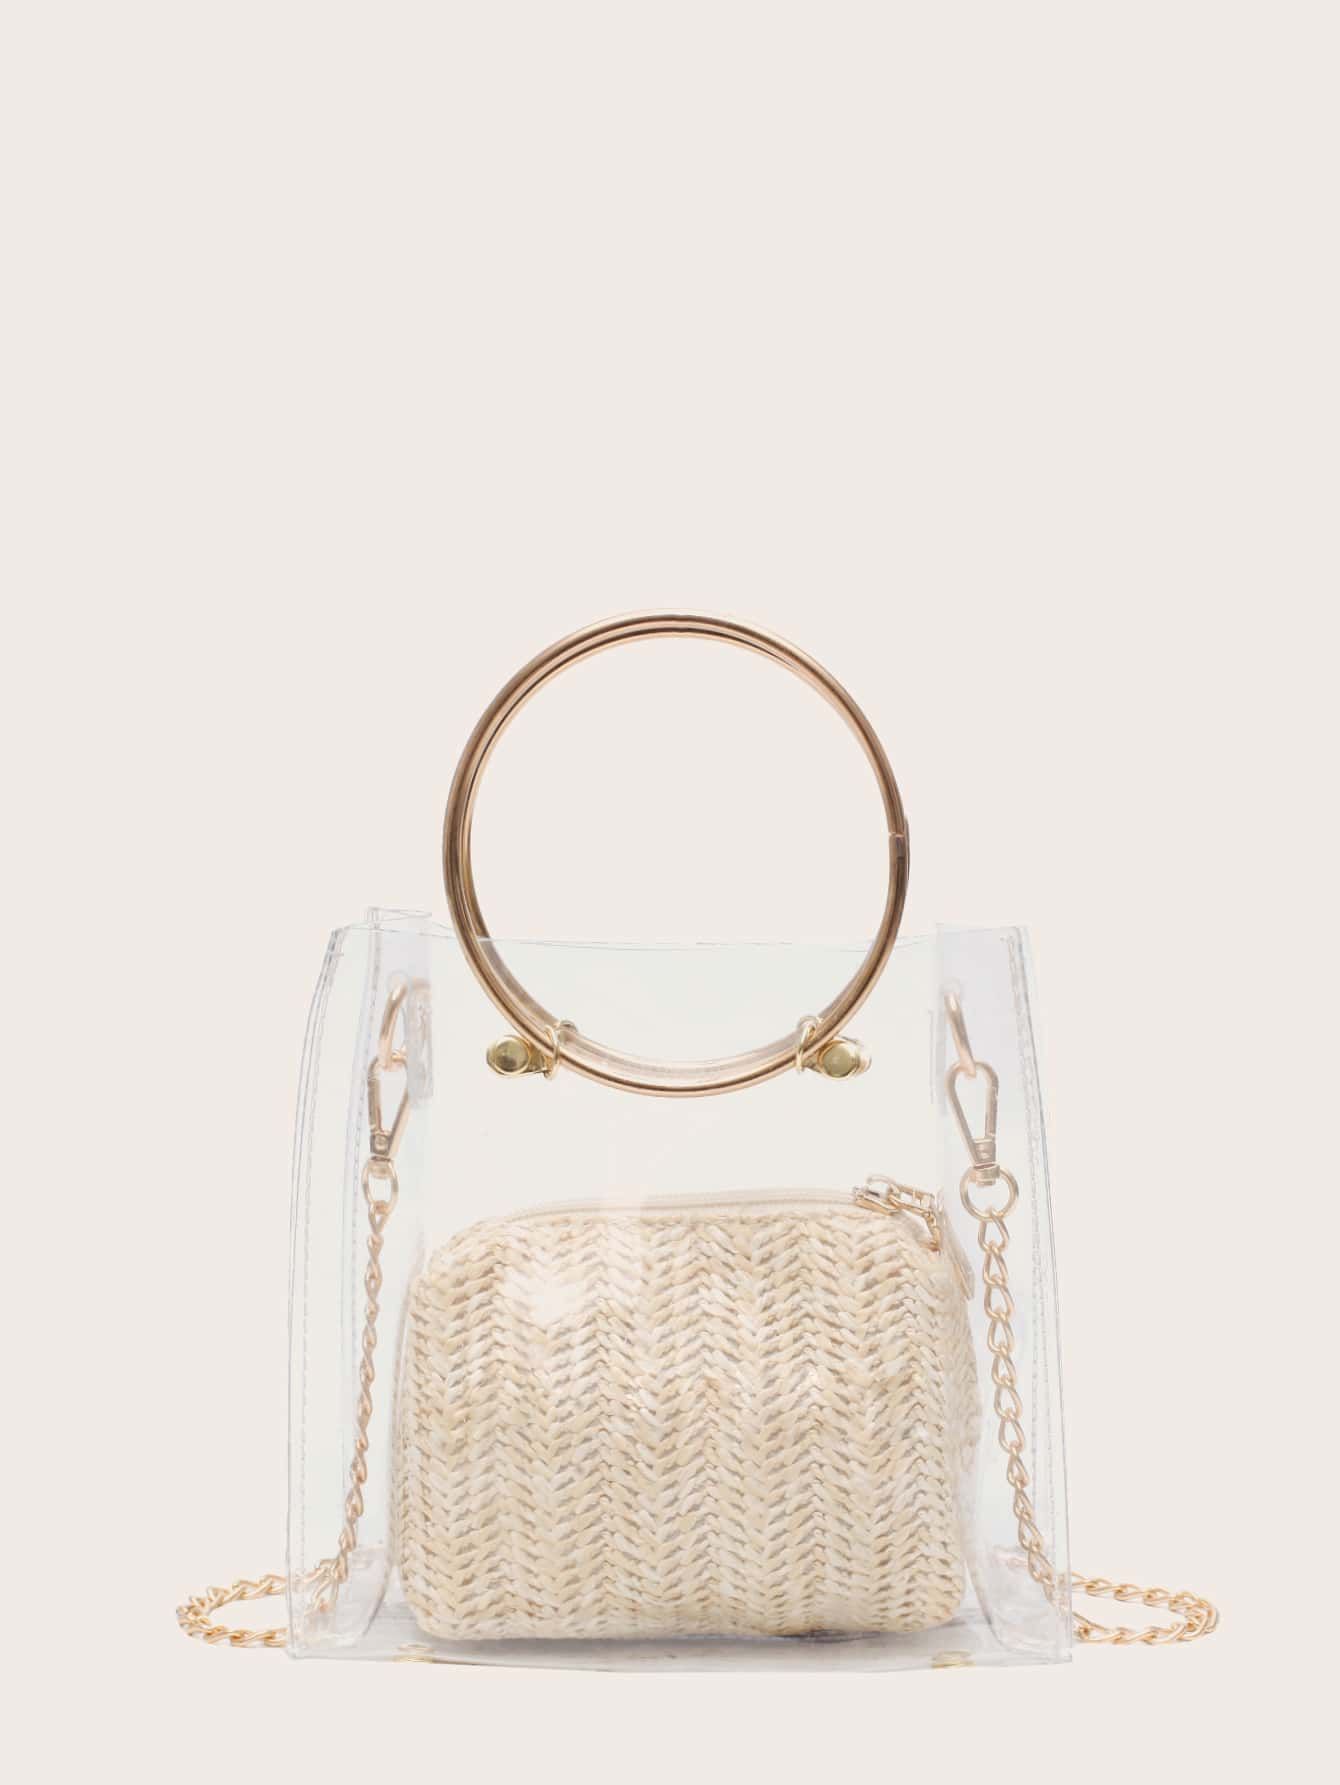 Clear Satchel Bag With Straw Inner Pouch | SHEIN